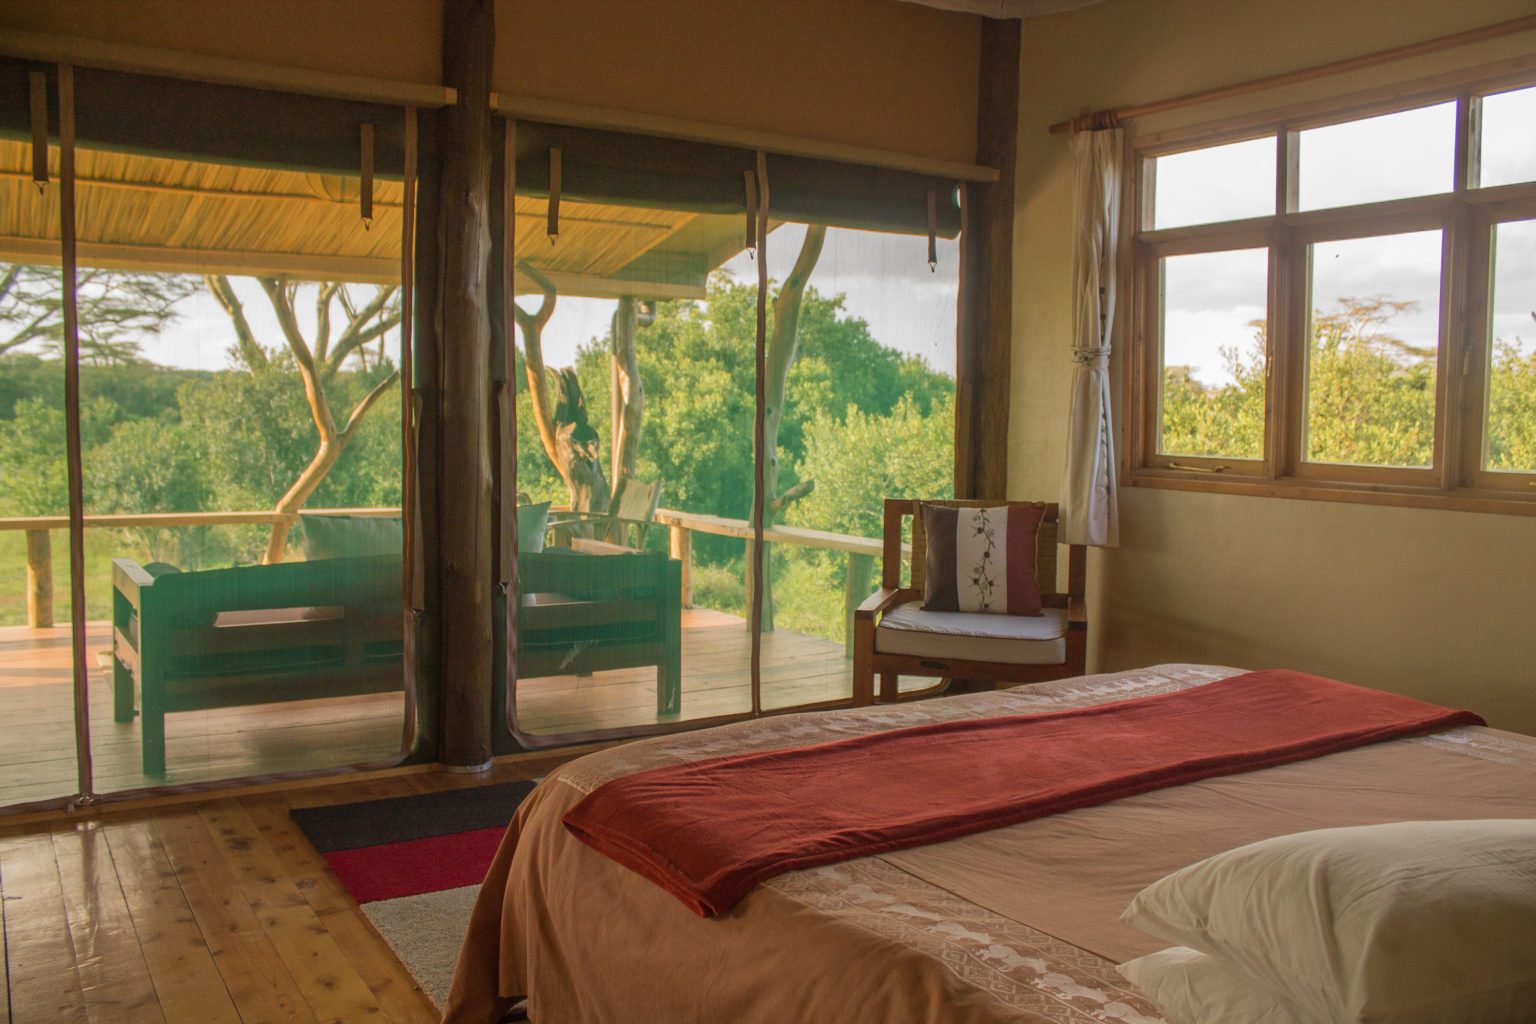 interior of ol pejeta safari cottage bedroom showing the end of the bed and porch